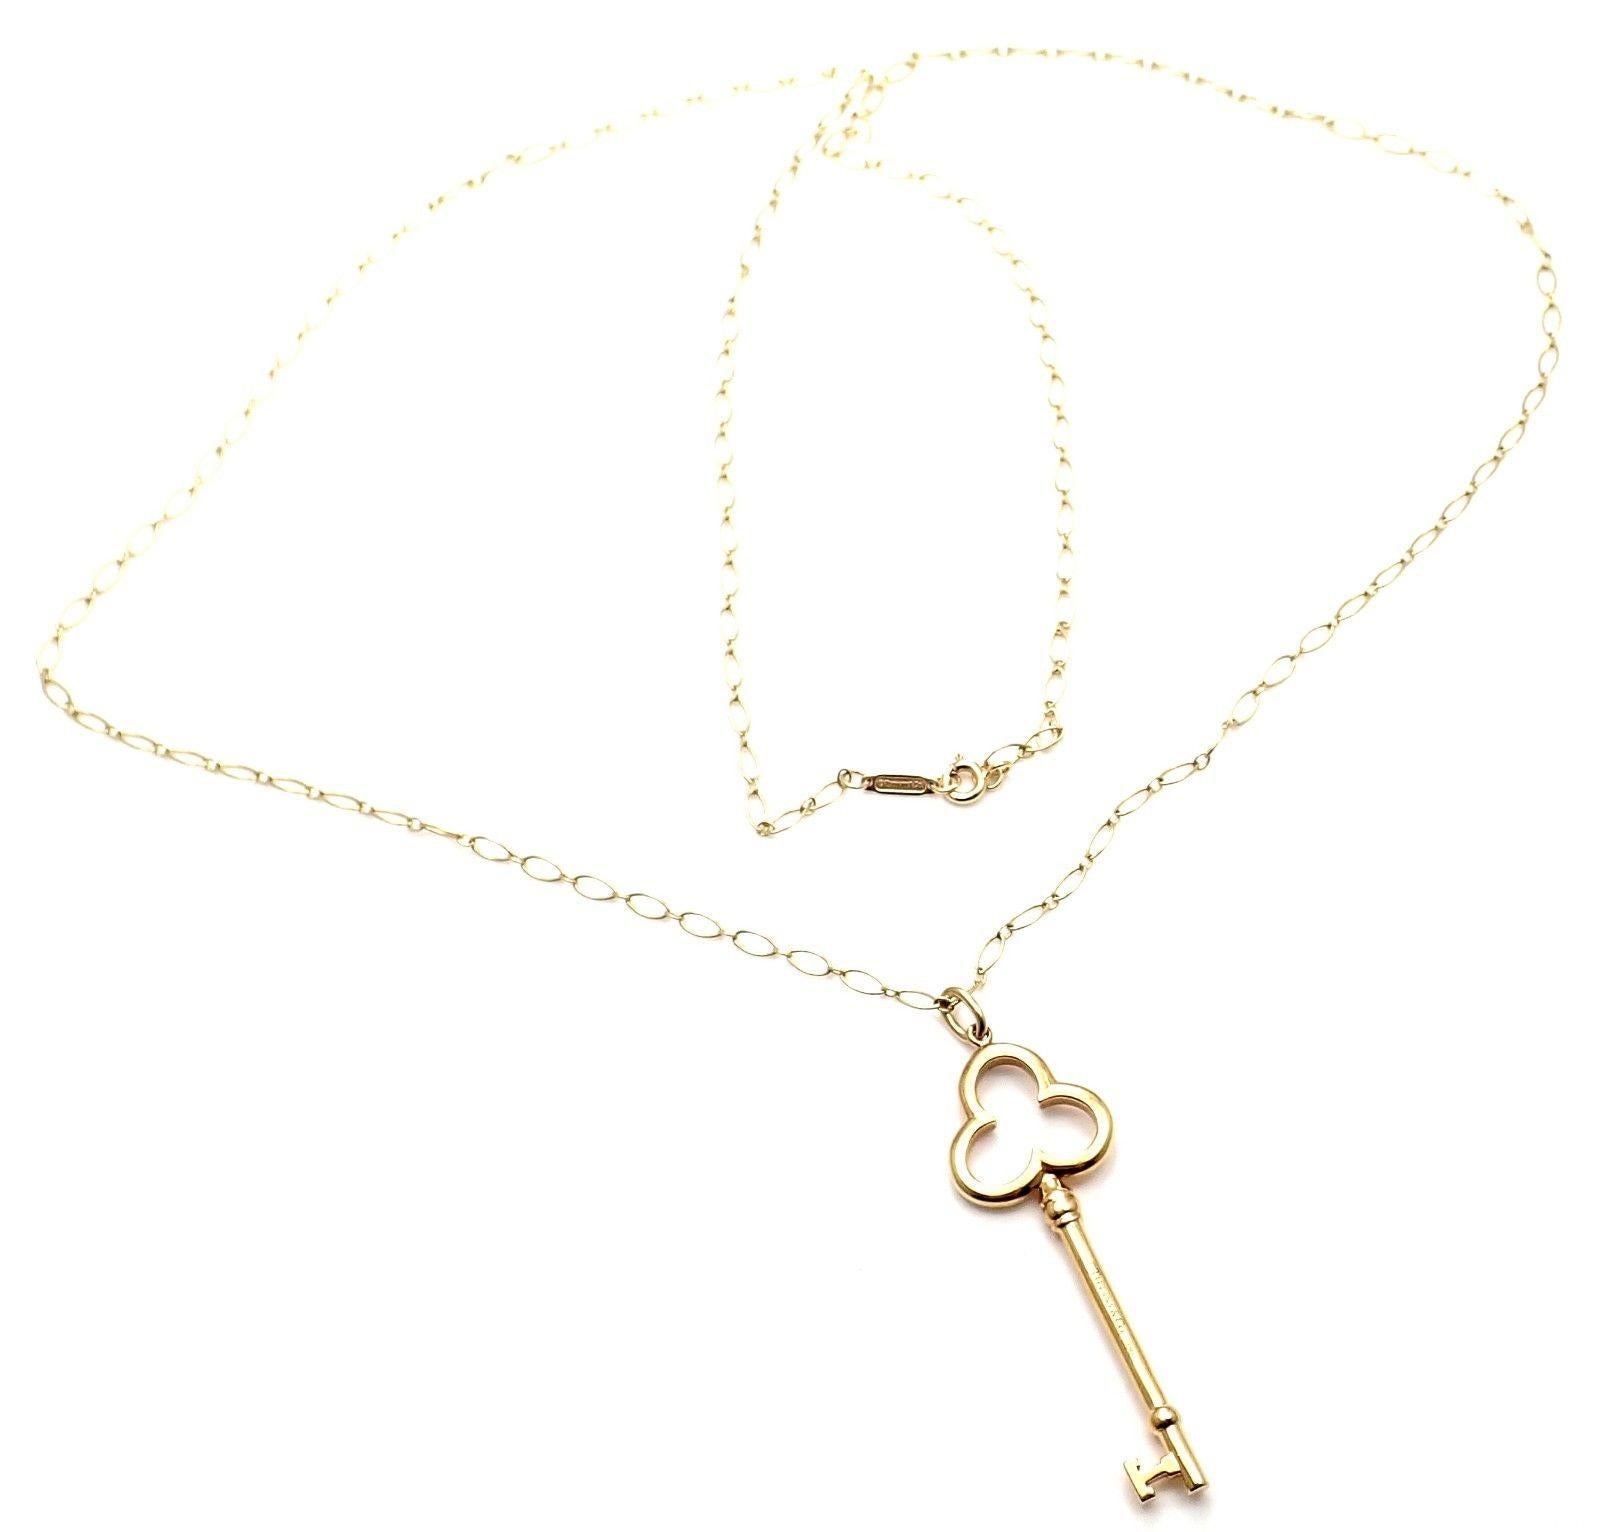 Tiffany & Co. Trefoil Key Pendant Oval Link Yellow Gold Chain Necklace 2